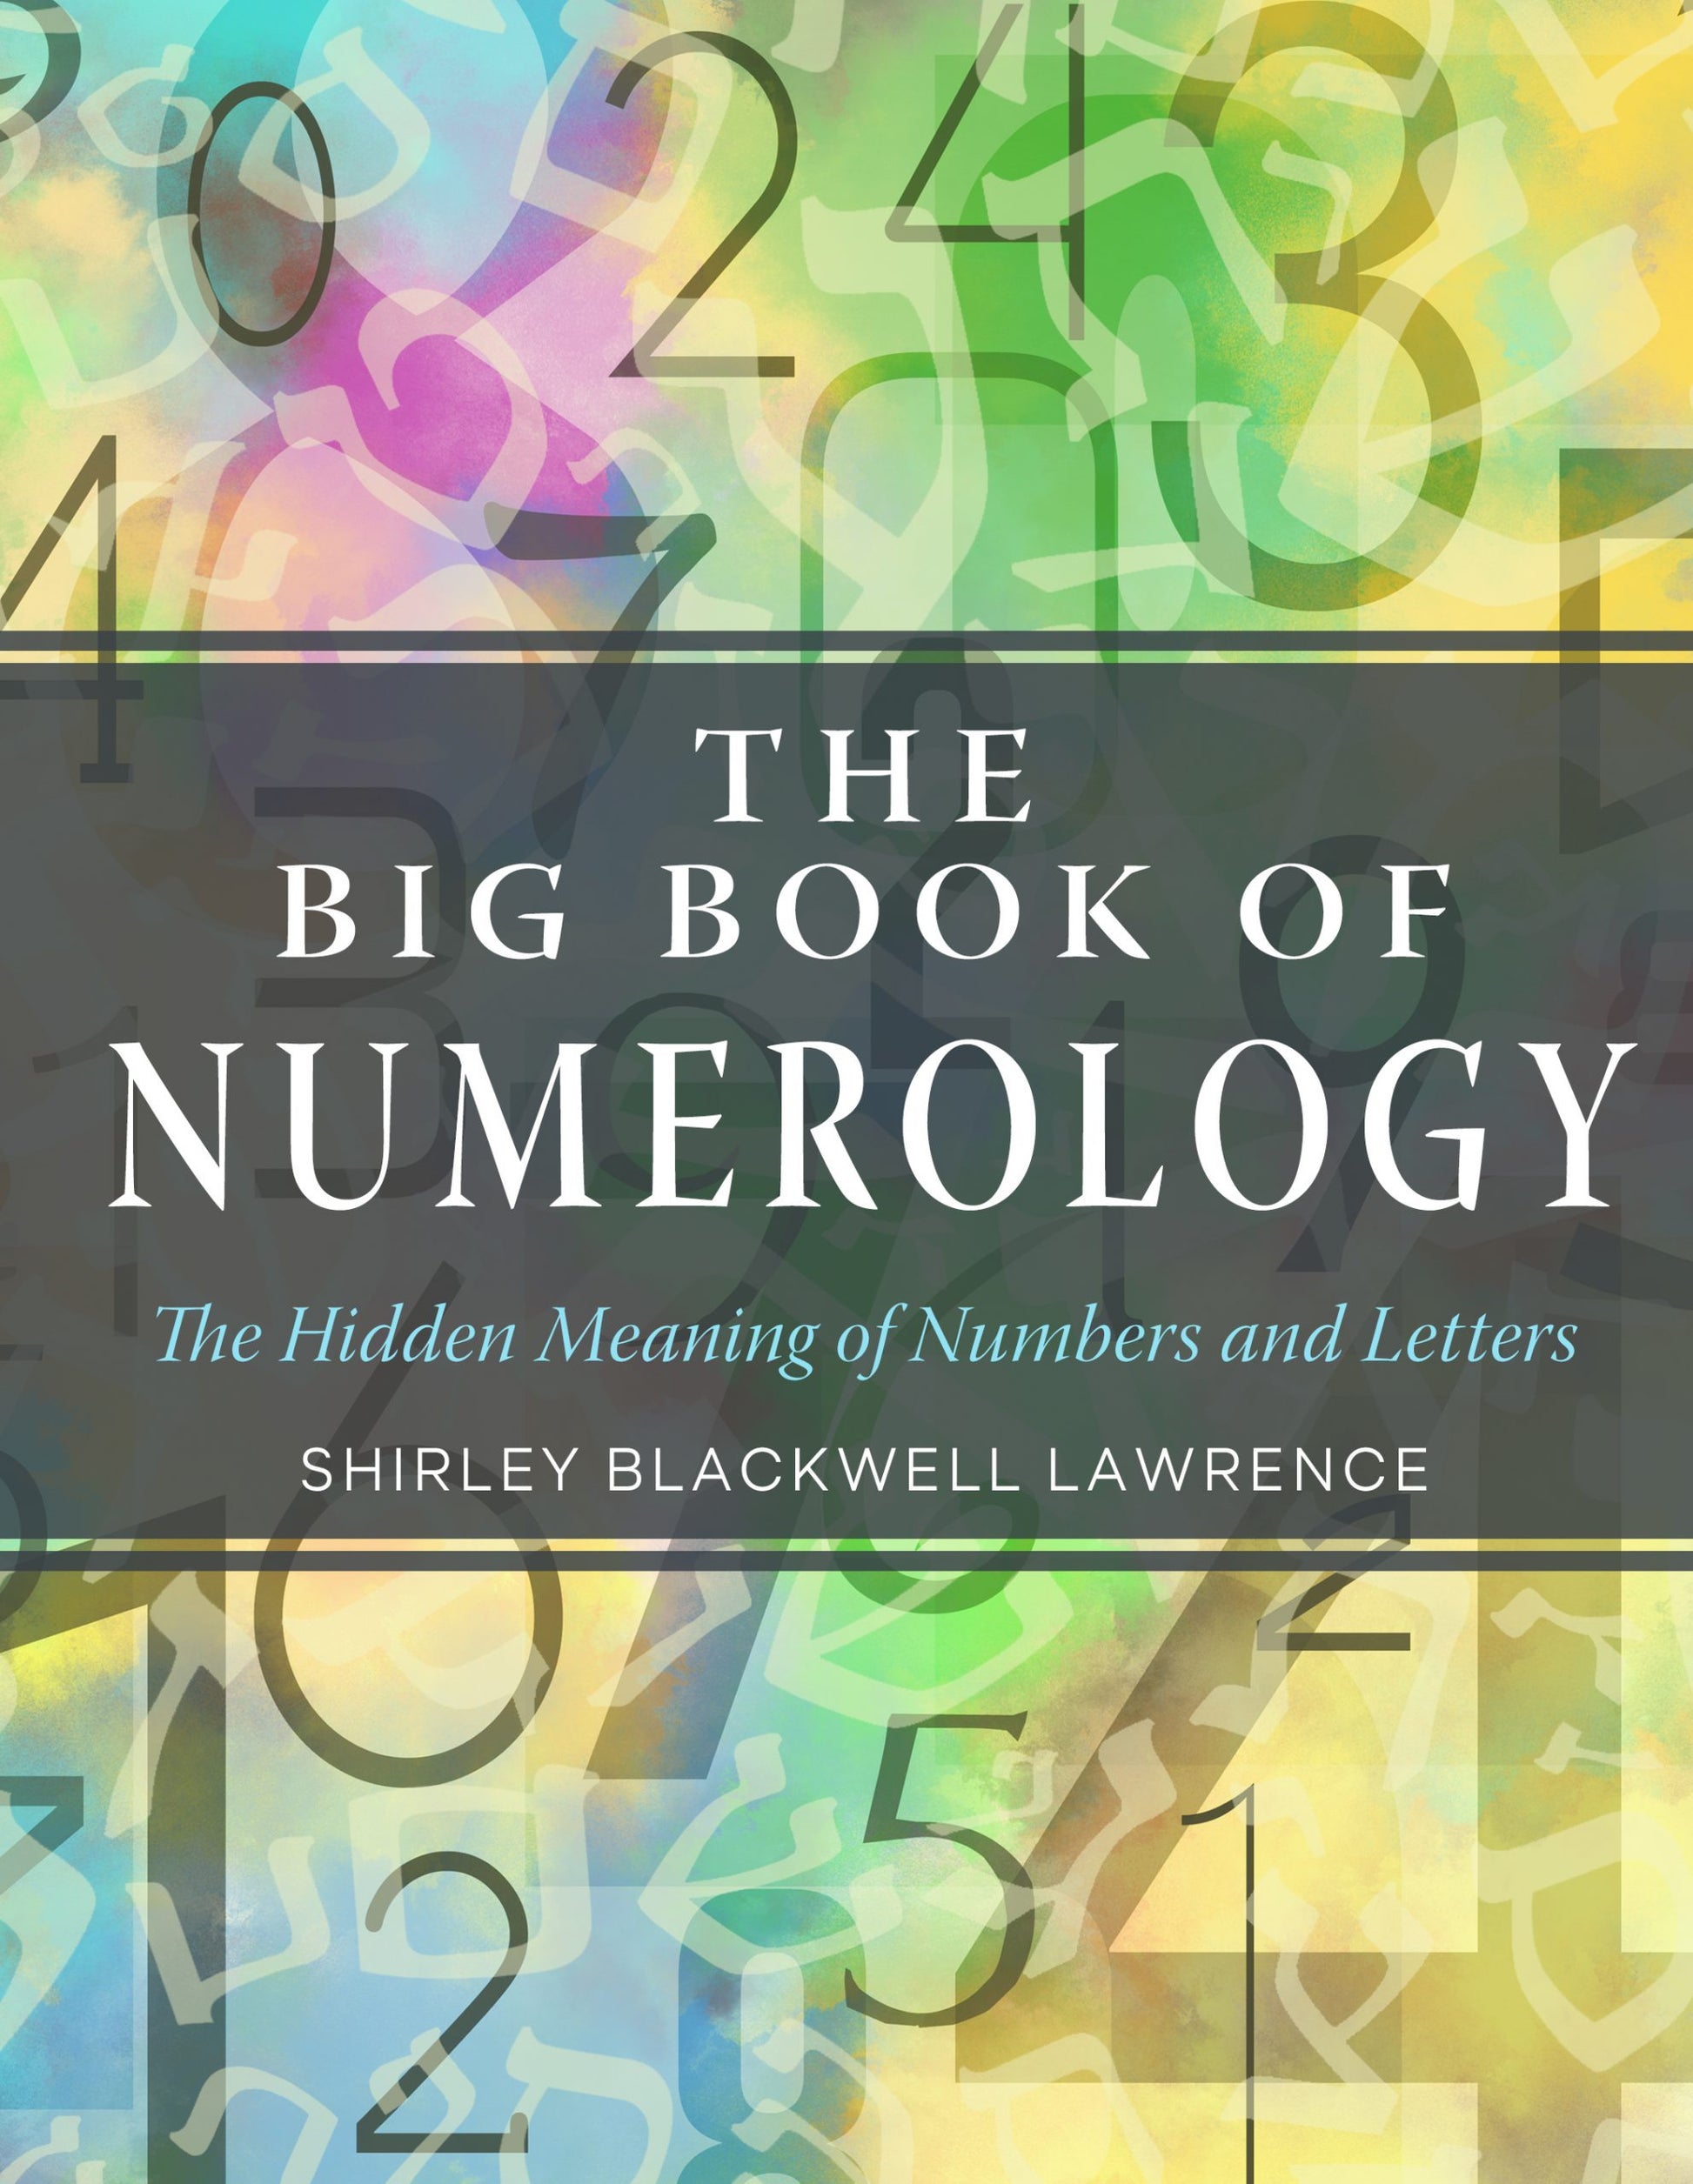 The Big Book of Numerology